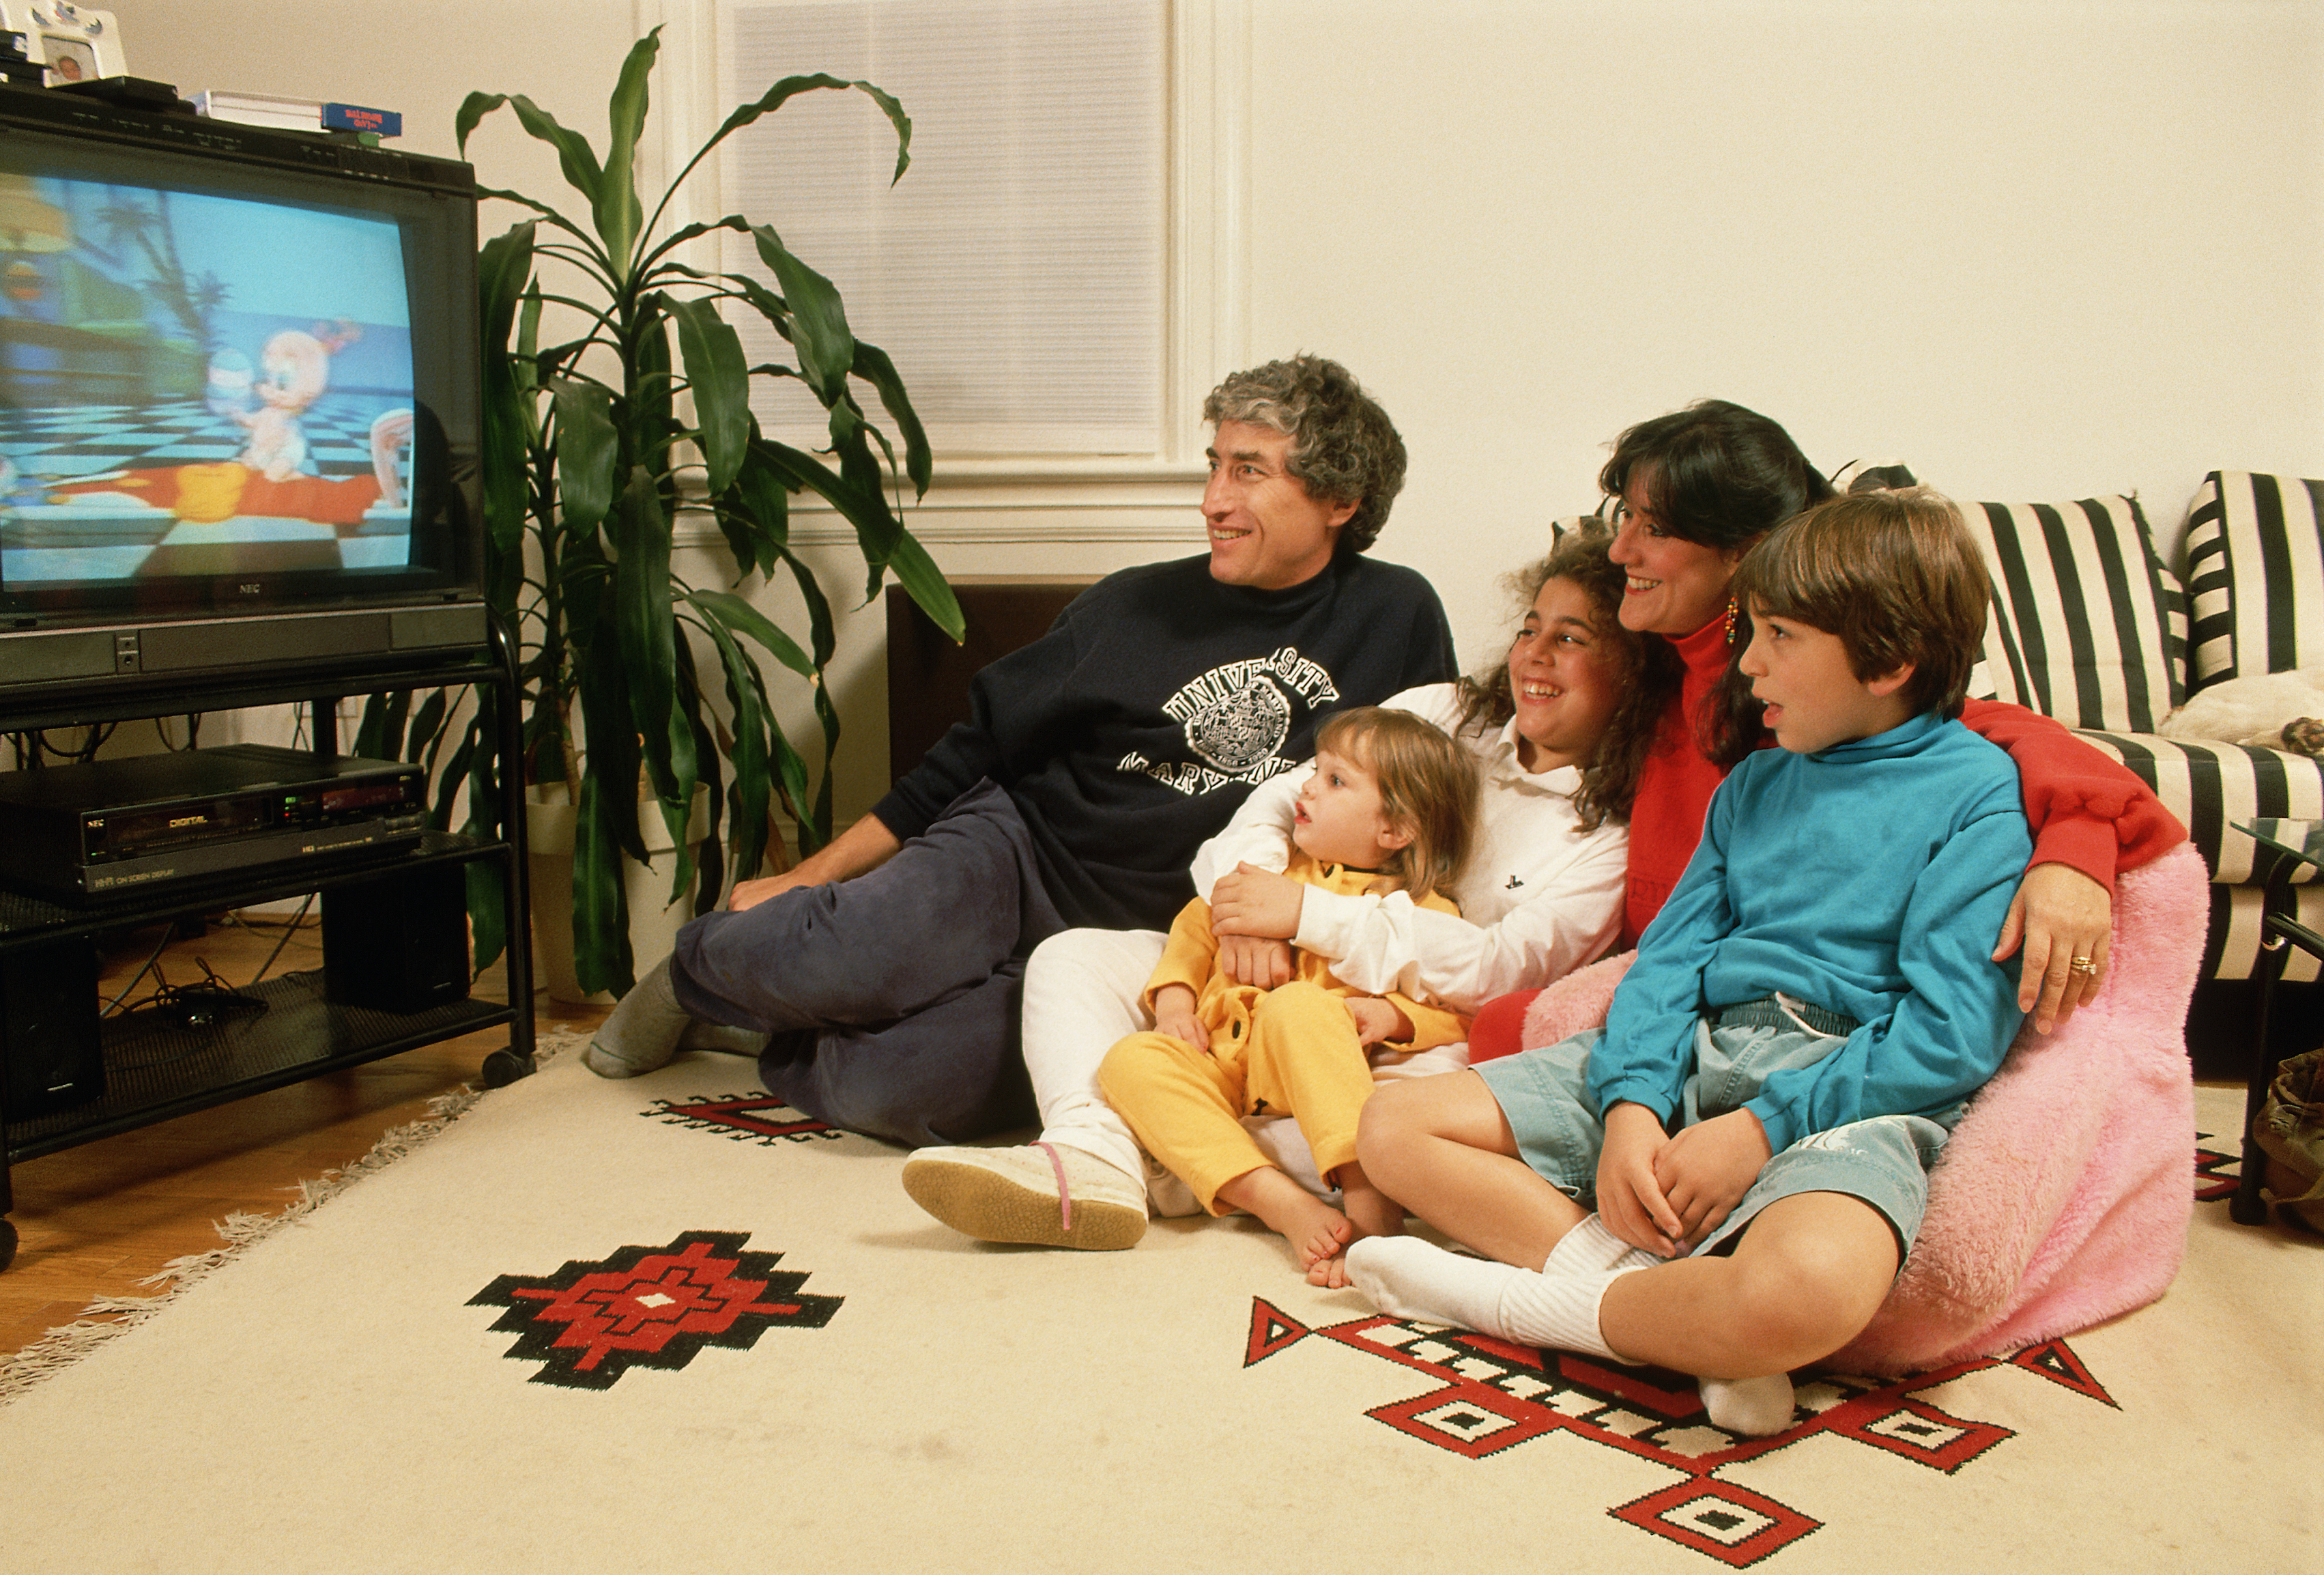 A family of five sits on a living room floor watching television together, smiling and enjoying a TV show